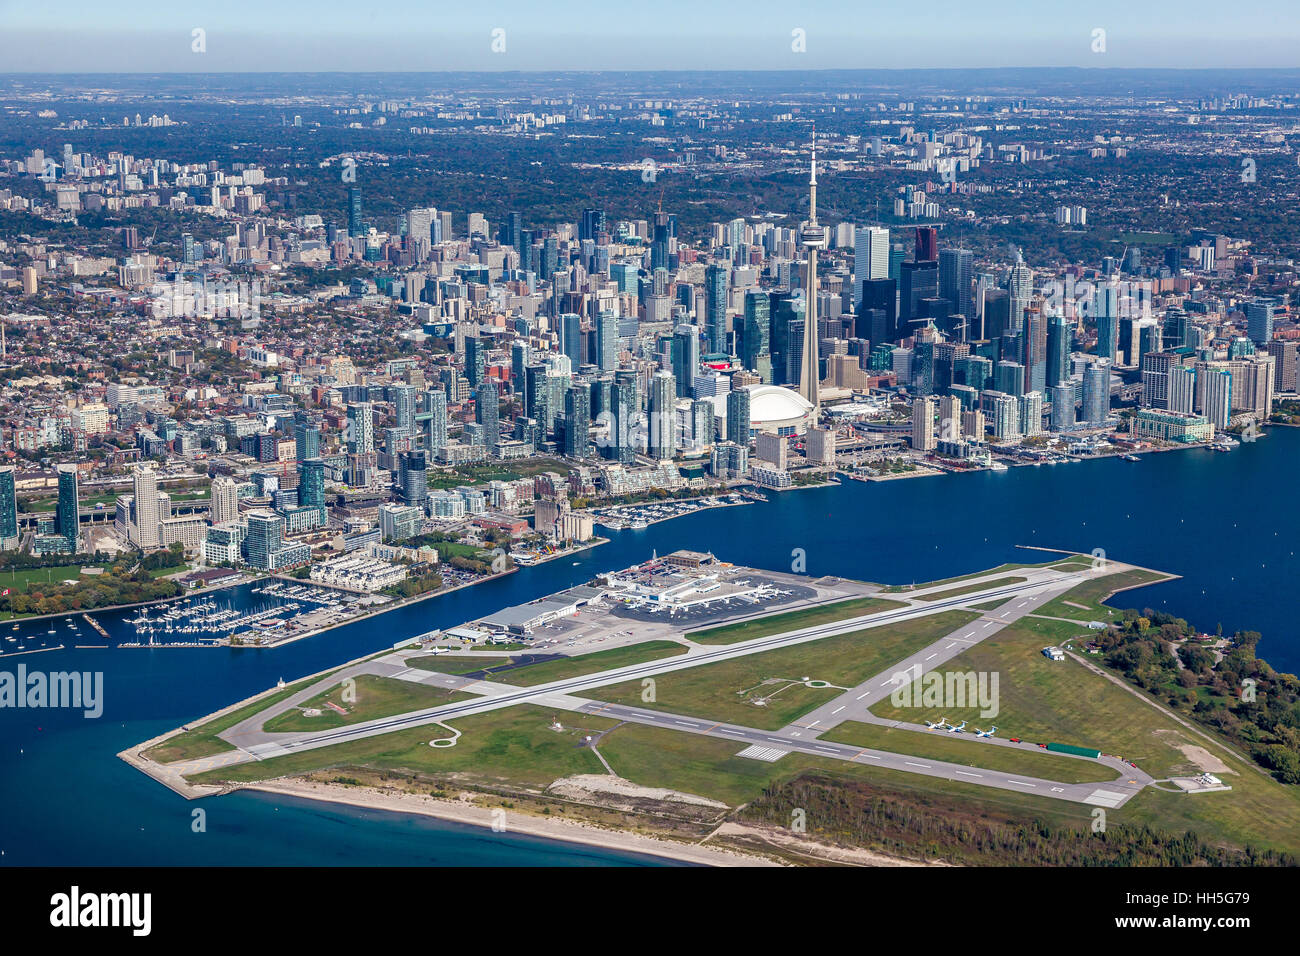 an-aerial-view-from-the-south-west-of-city-of-toronto-skyline-with-HH5G79.jpg